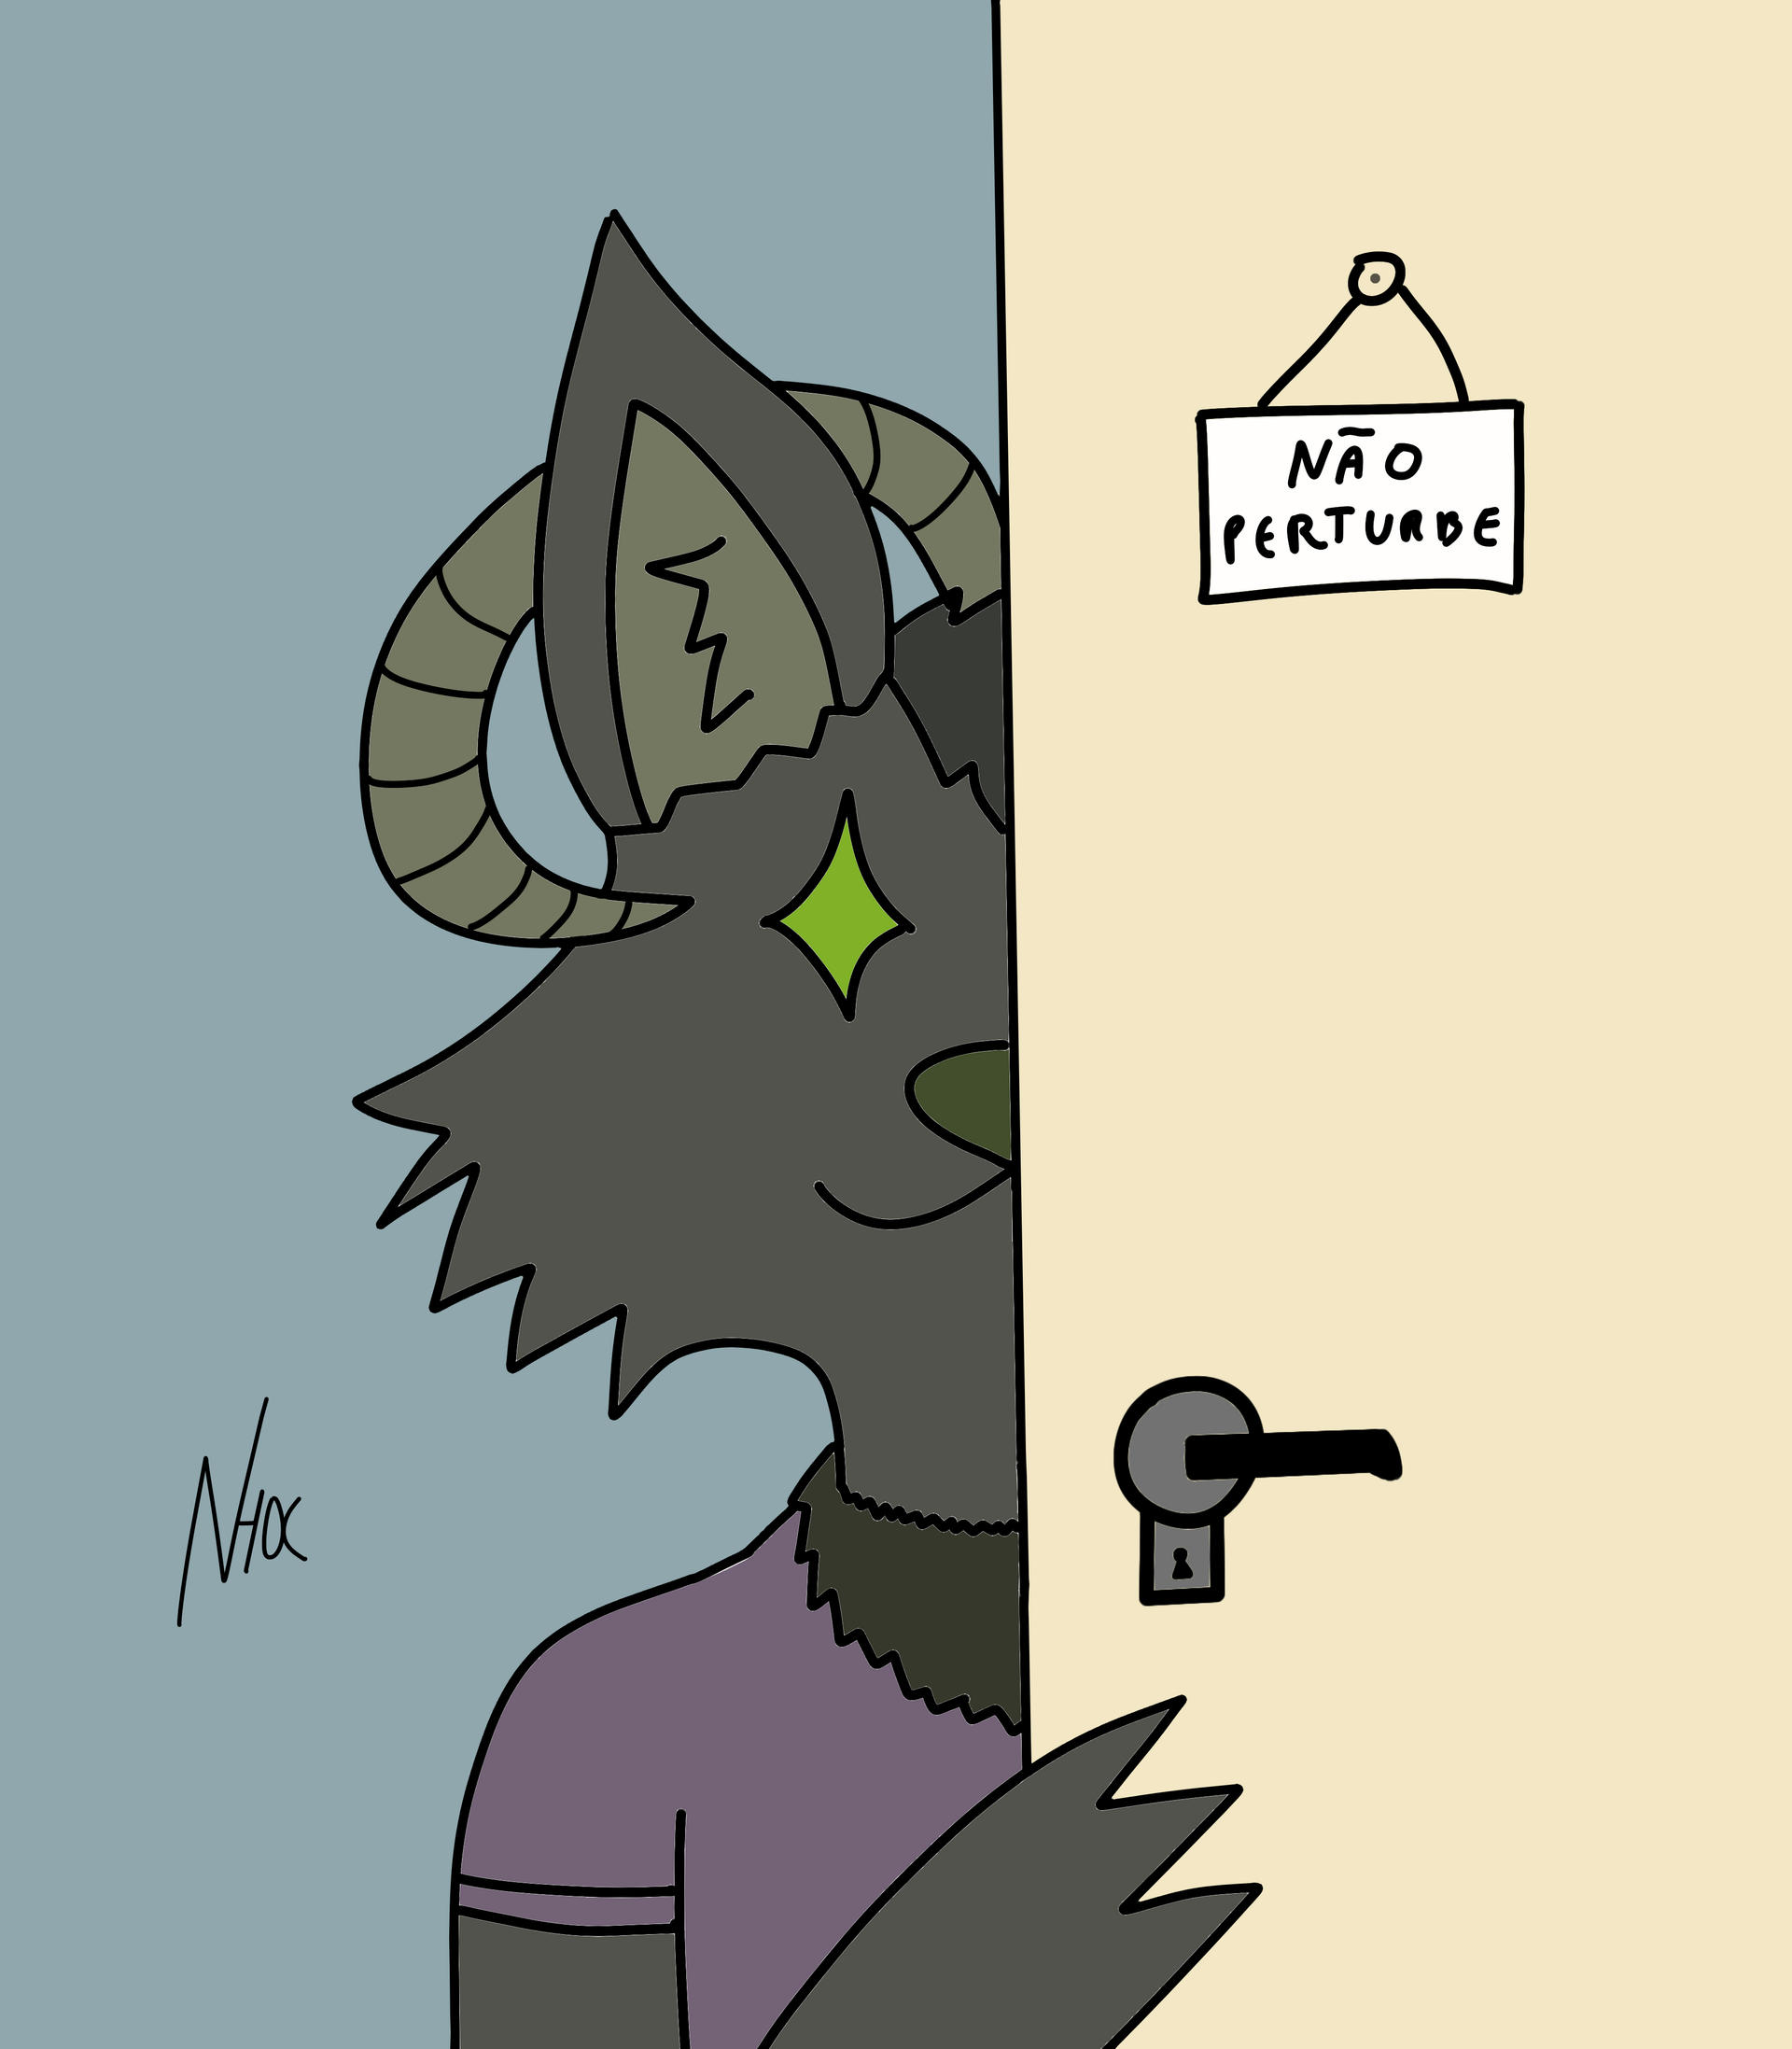 Sign: DO NOT DISTURB - coloring test by NhocDrawings on DeviantArt